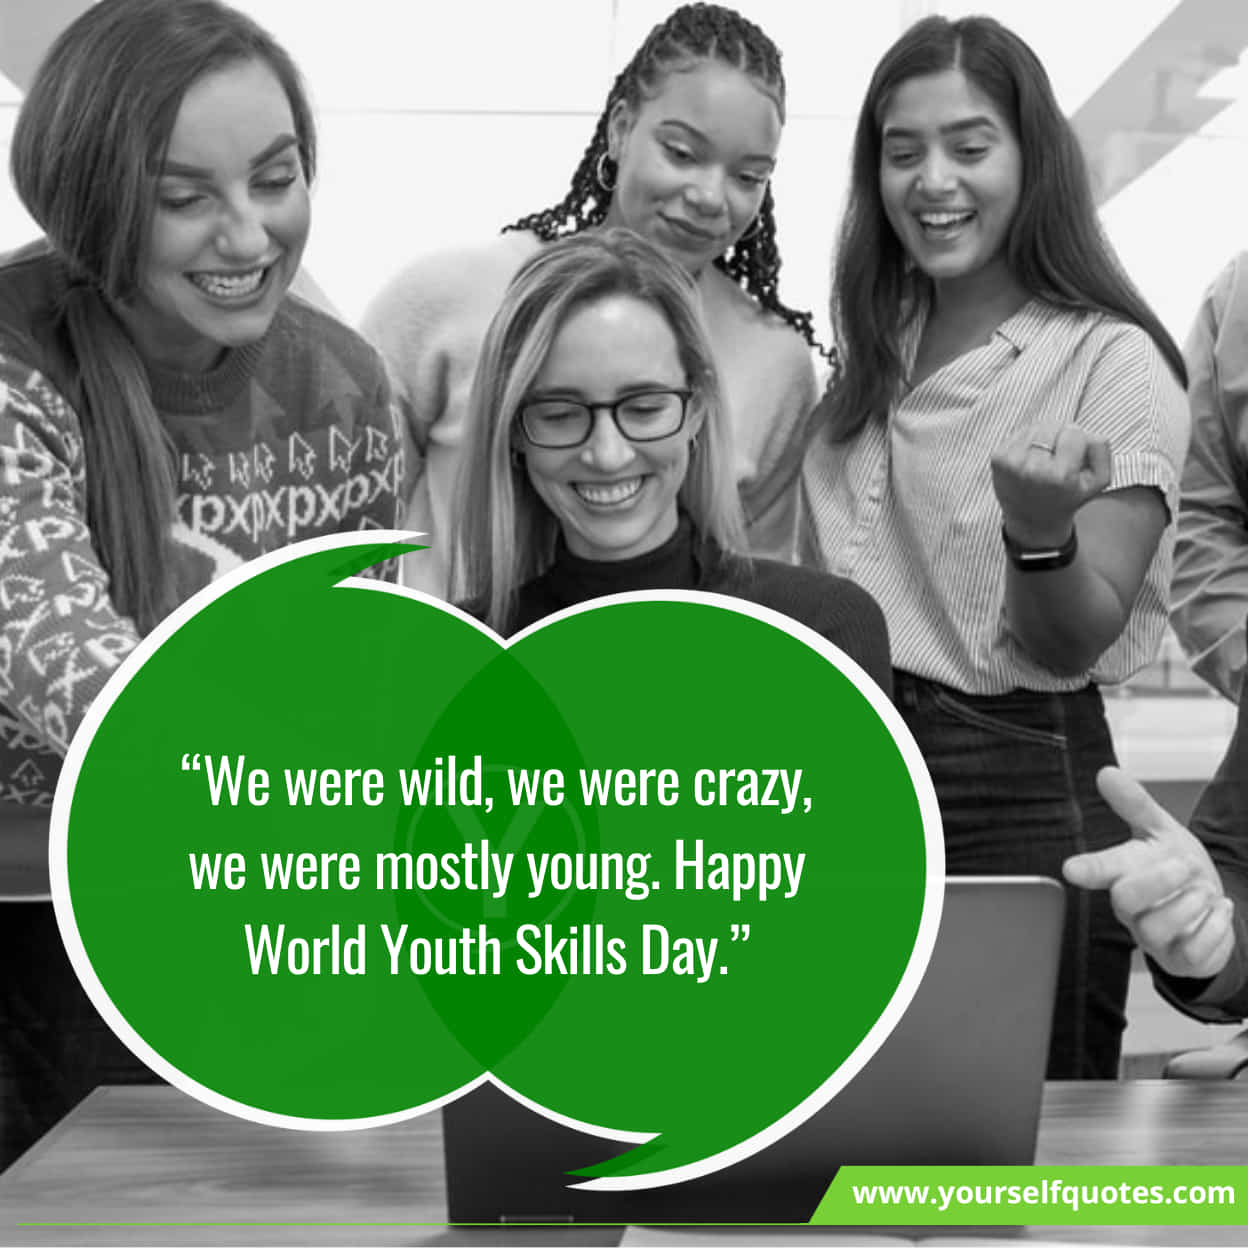 World Youth Skills Day Messages & Slogans